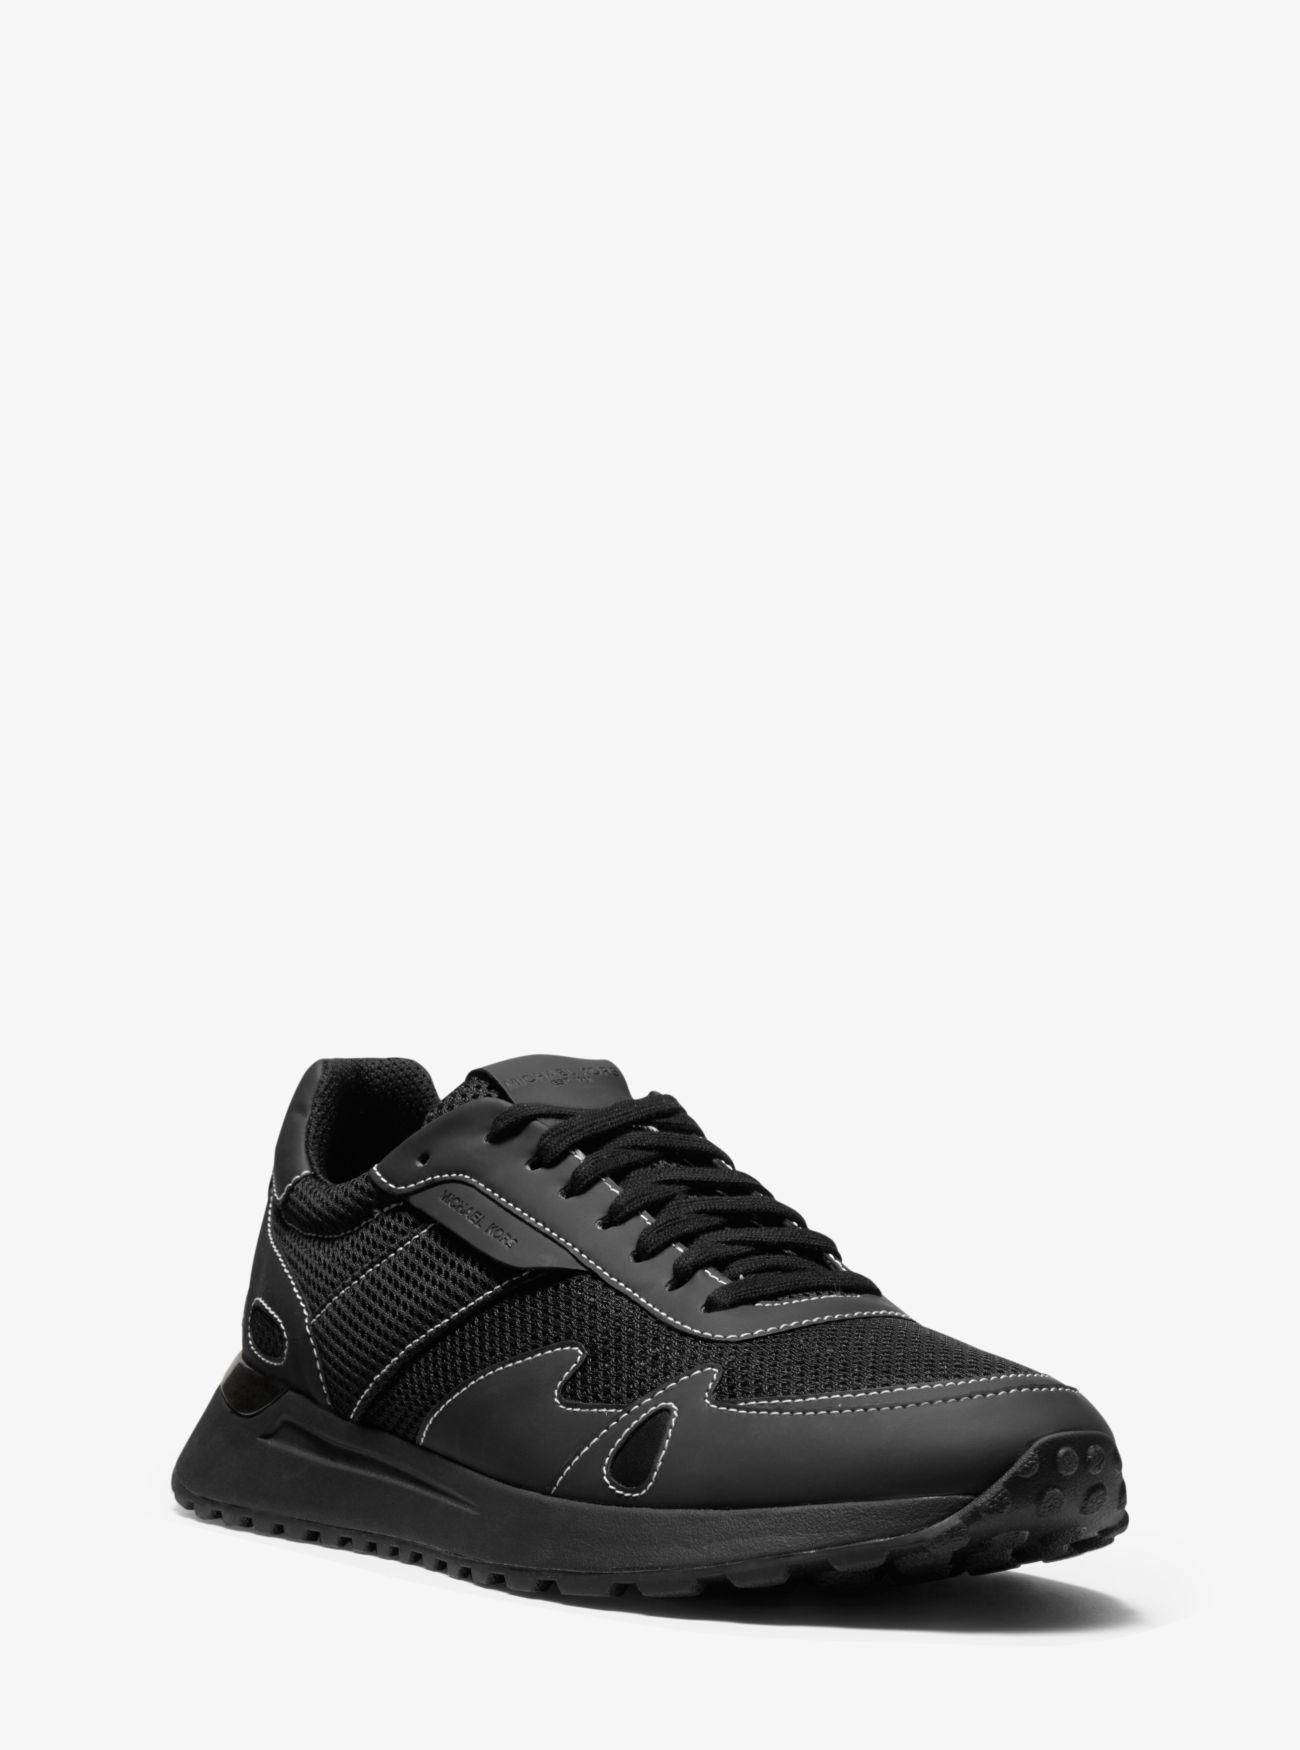 Michael Kors Miles Mesh And Leather Trainer in Black - Lyst